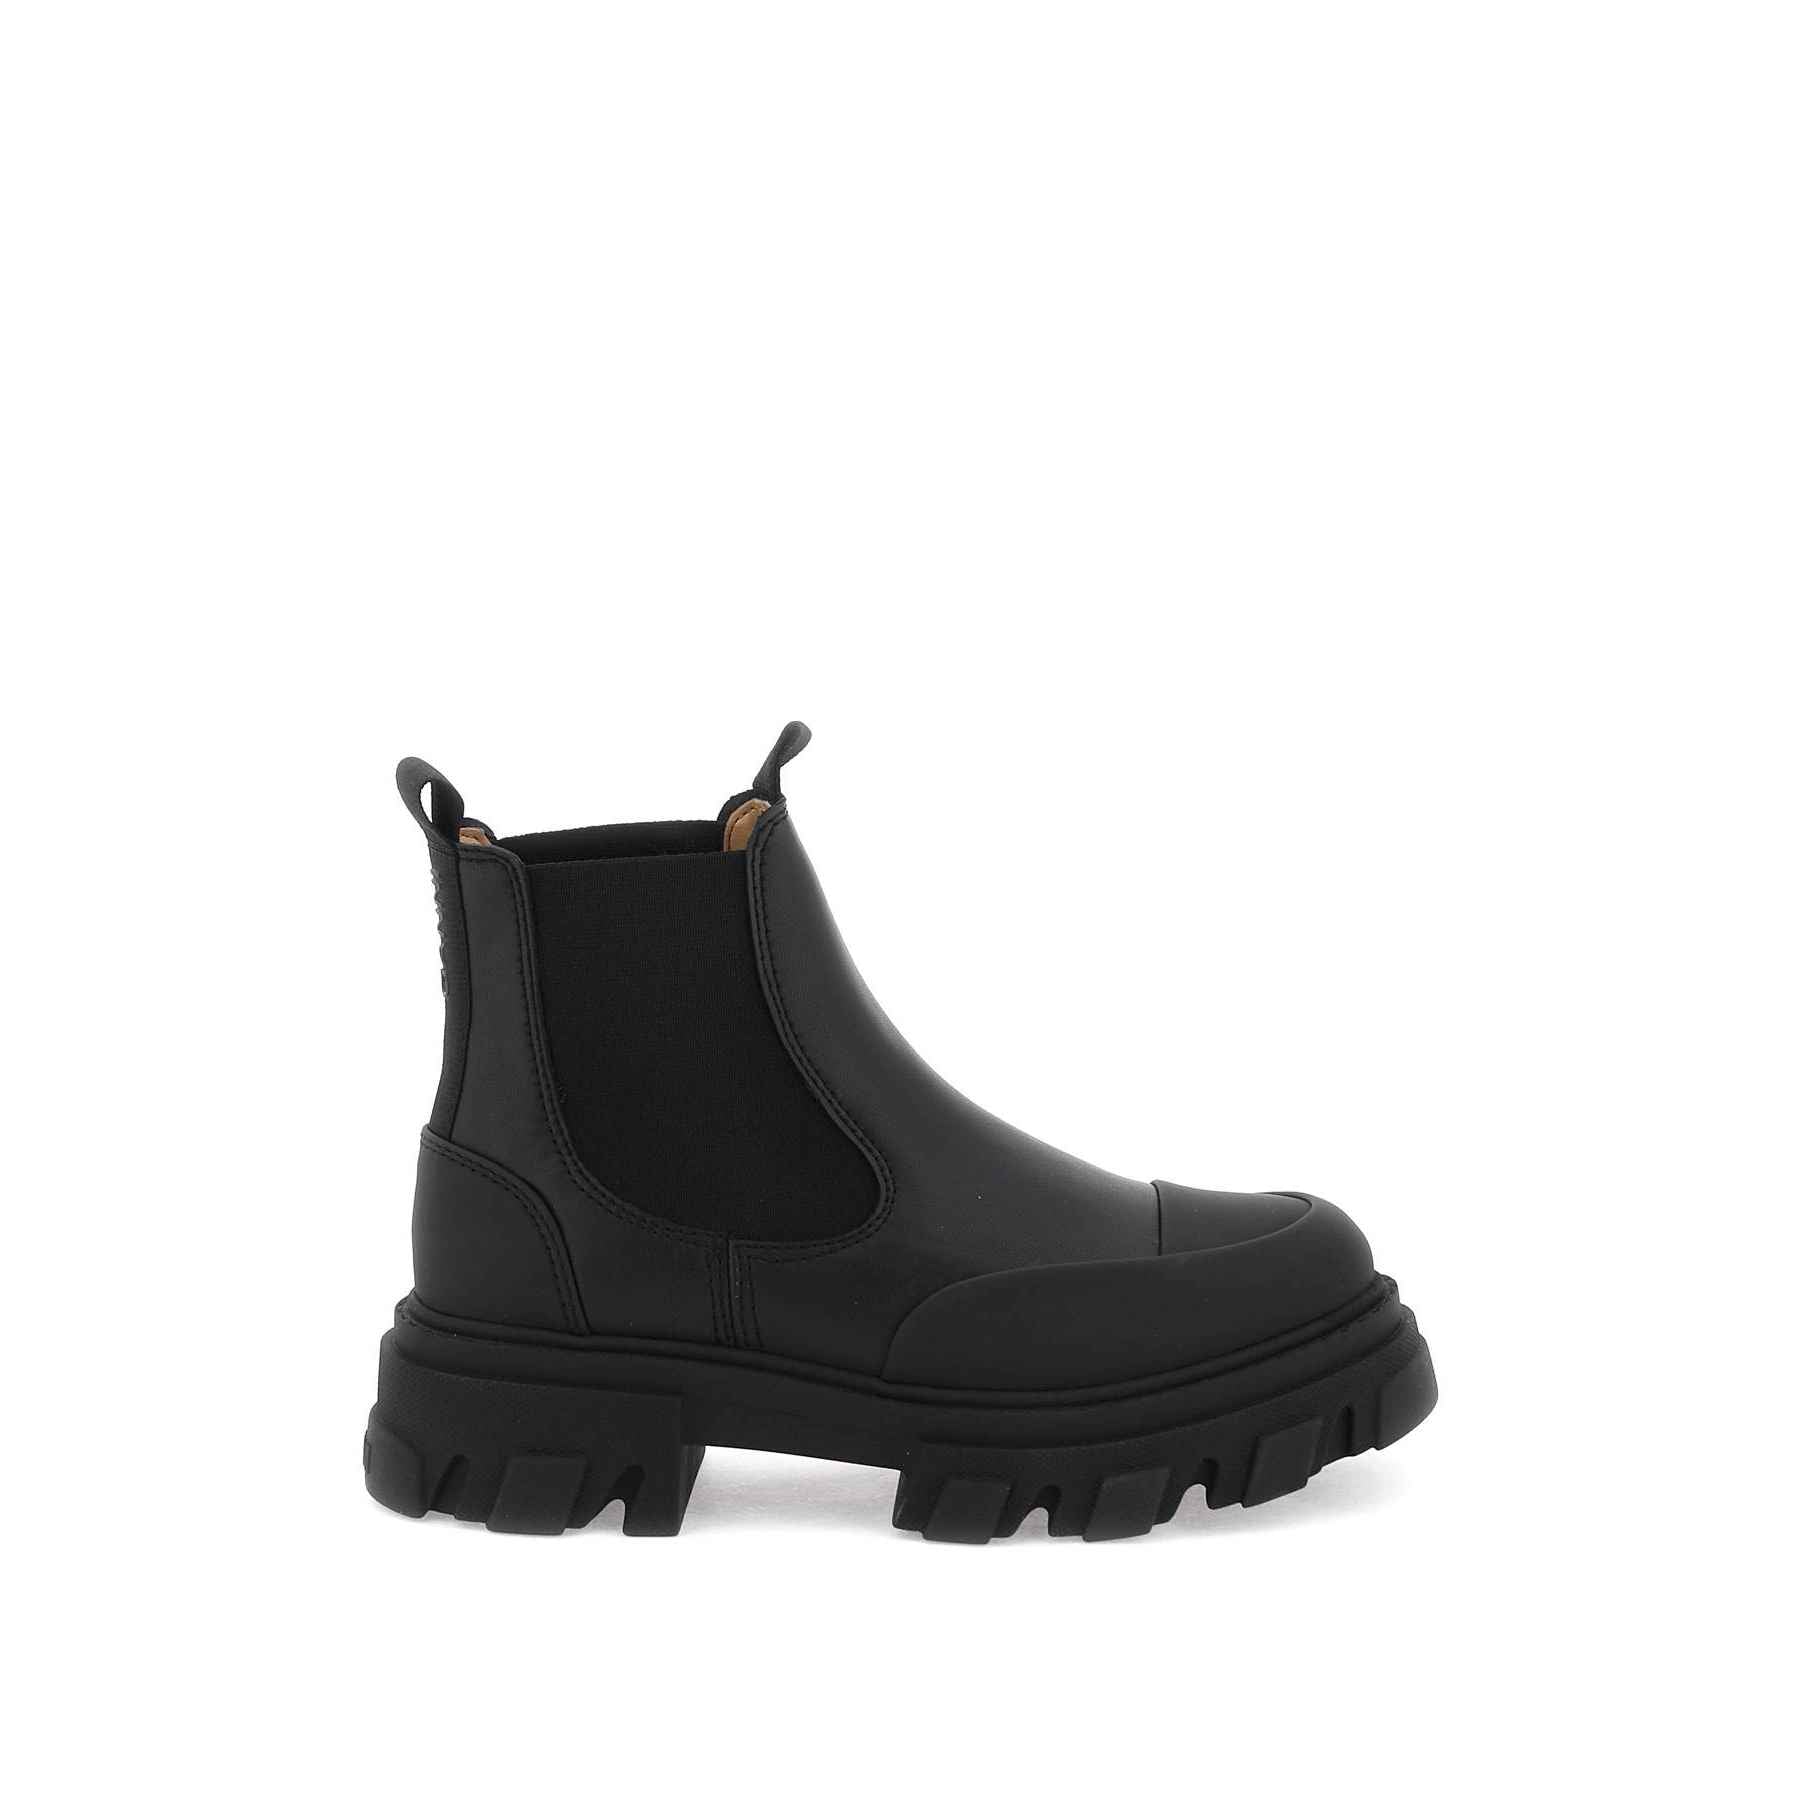 Ganni Cleated Low Chelsea Boots Black